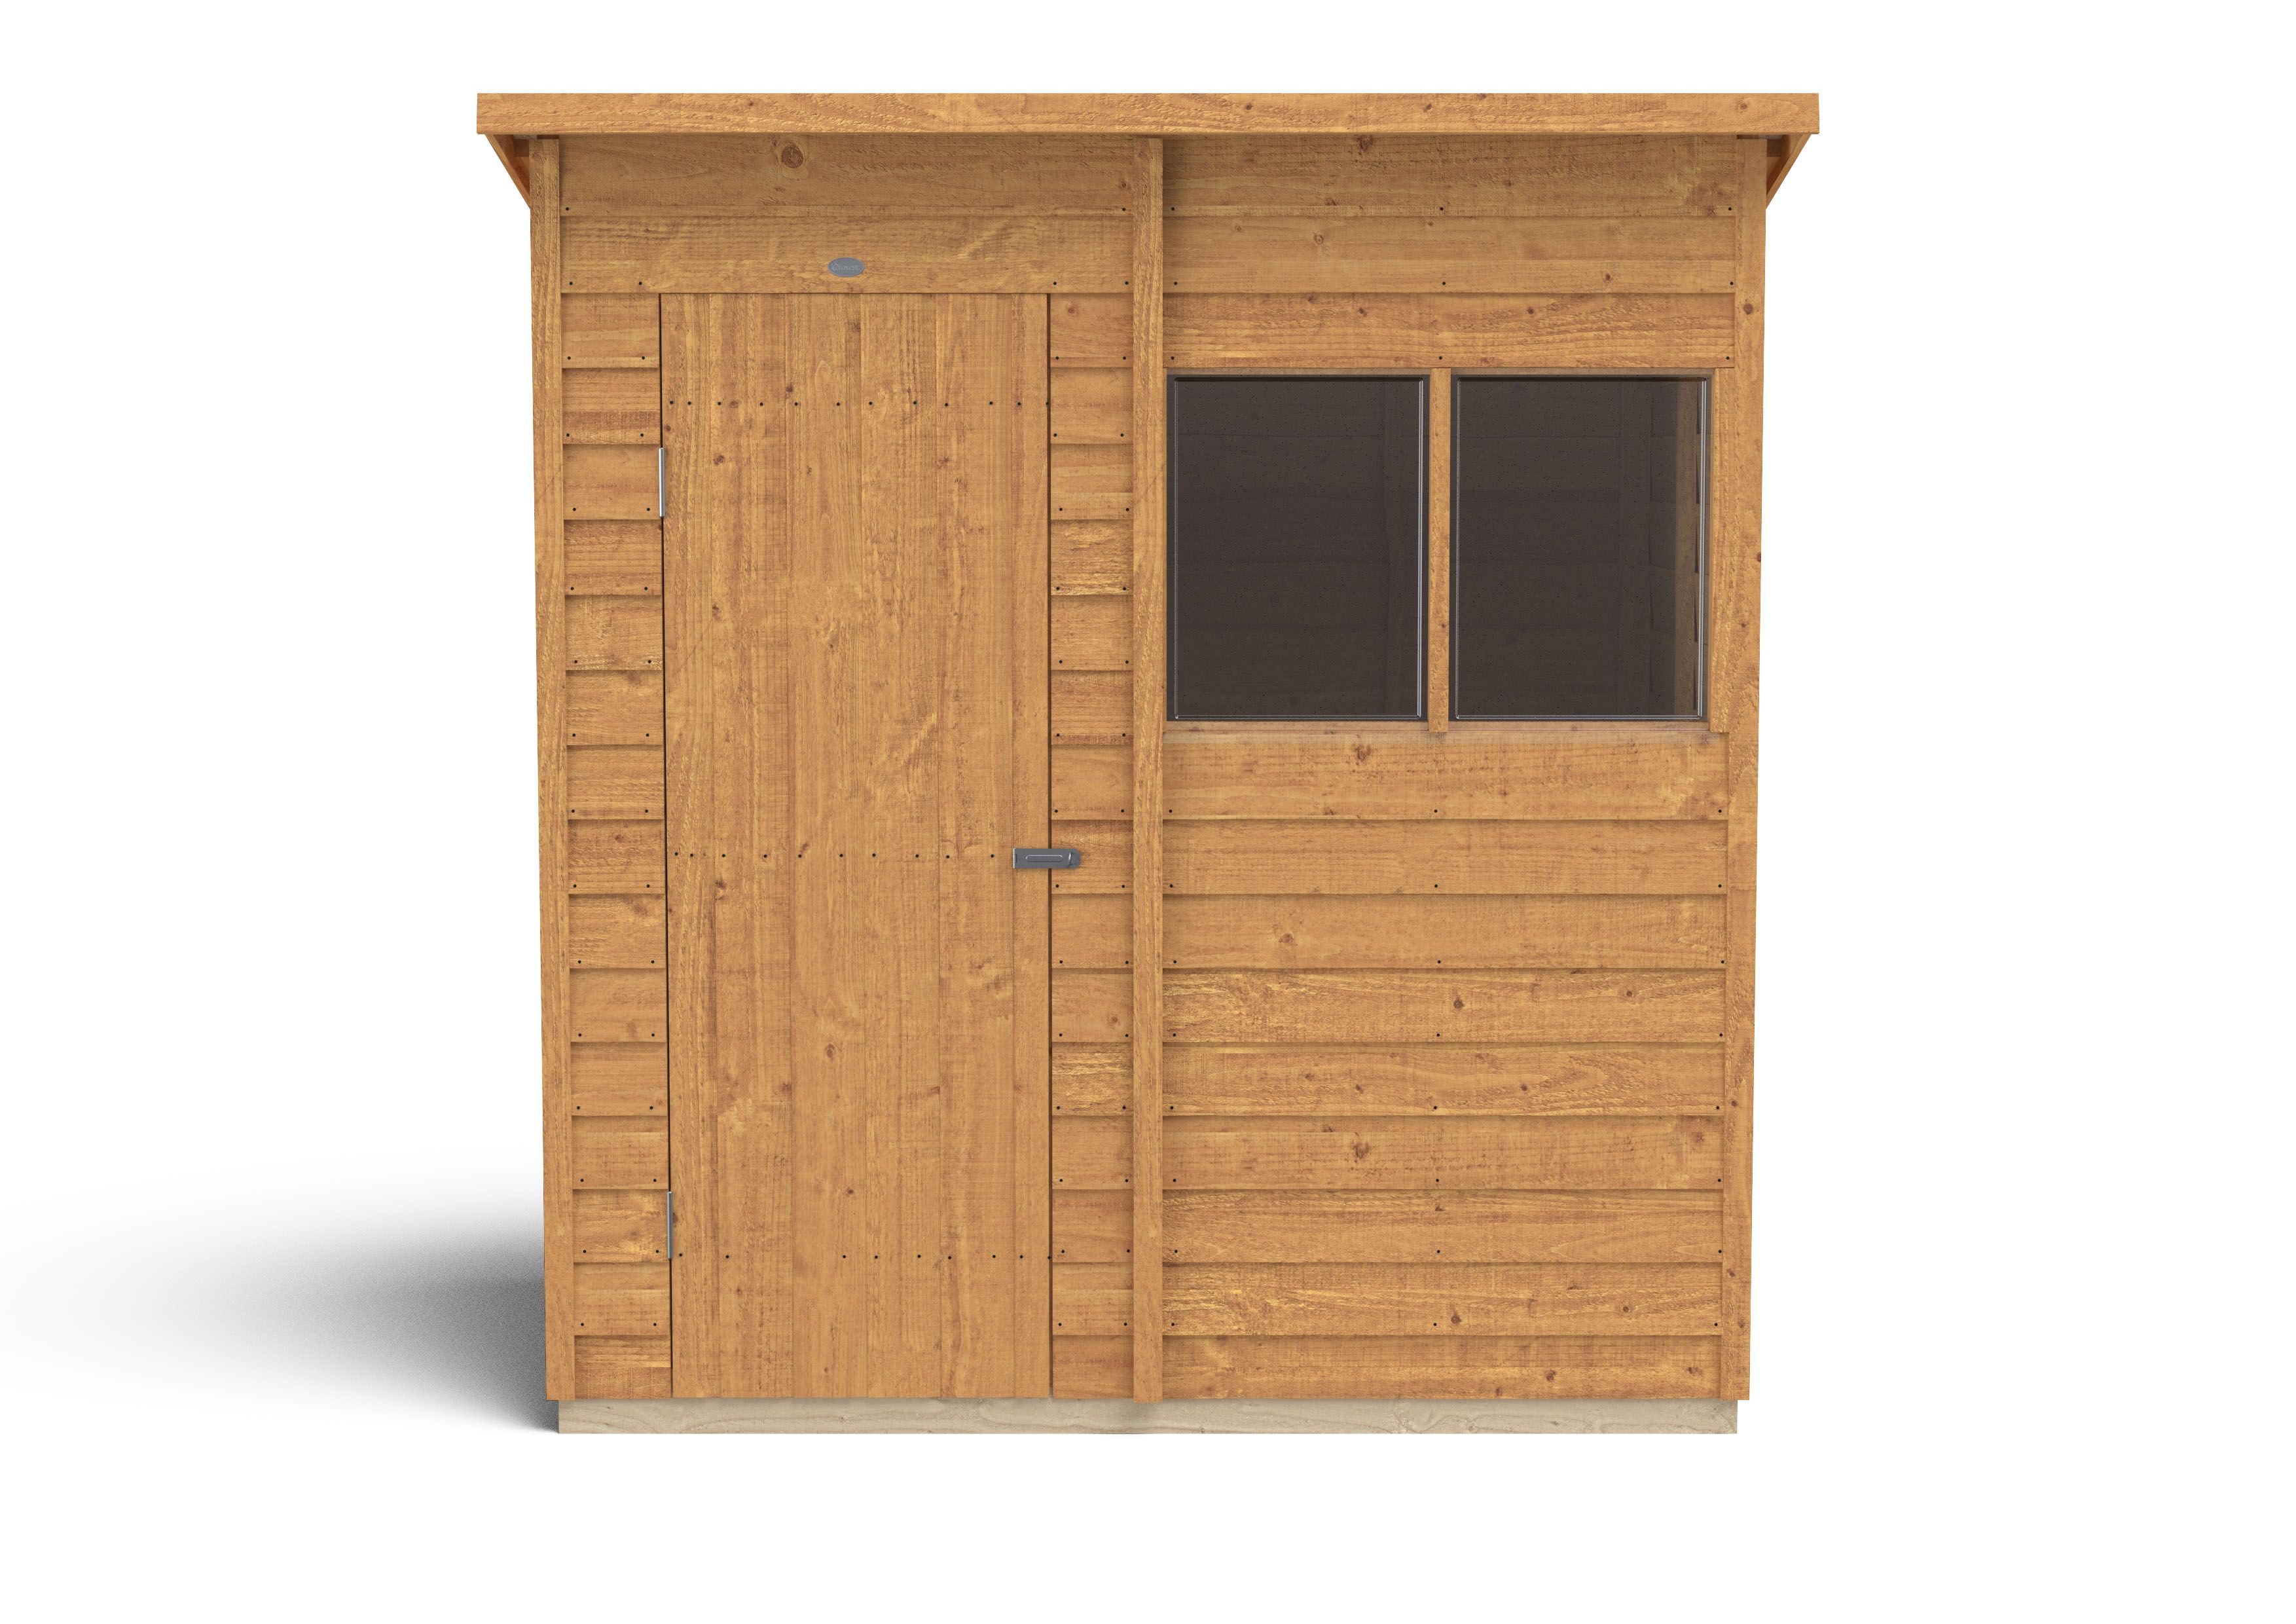 Forest Garden Overlap 6x4 ft Pent Wooden Dip treated Shed with floor & 2 windows (Base included)